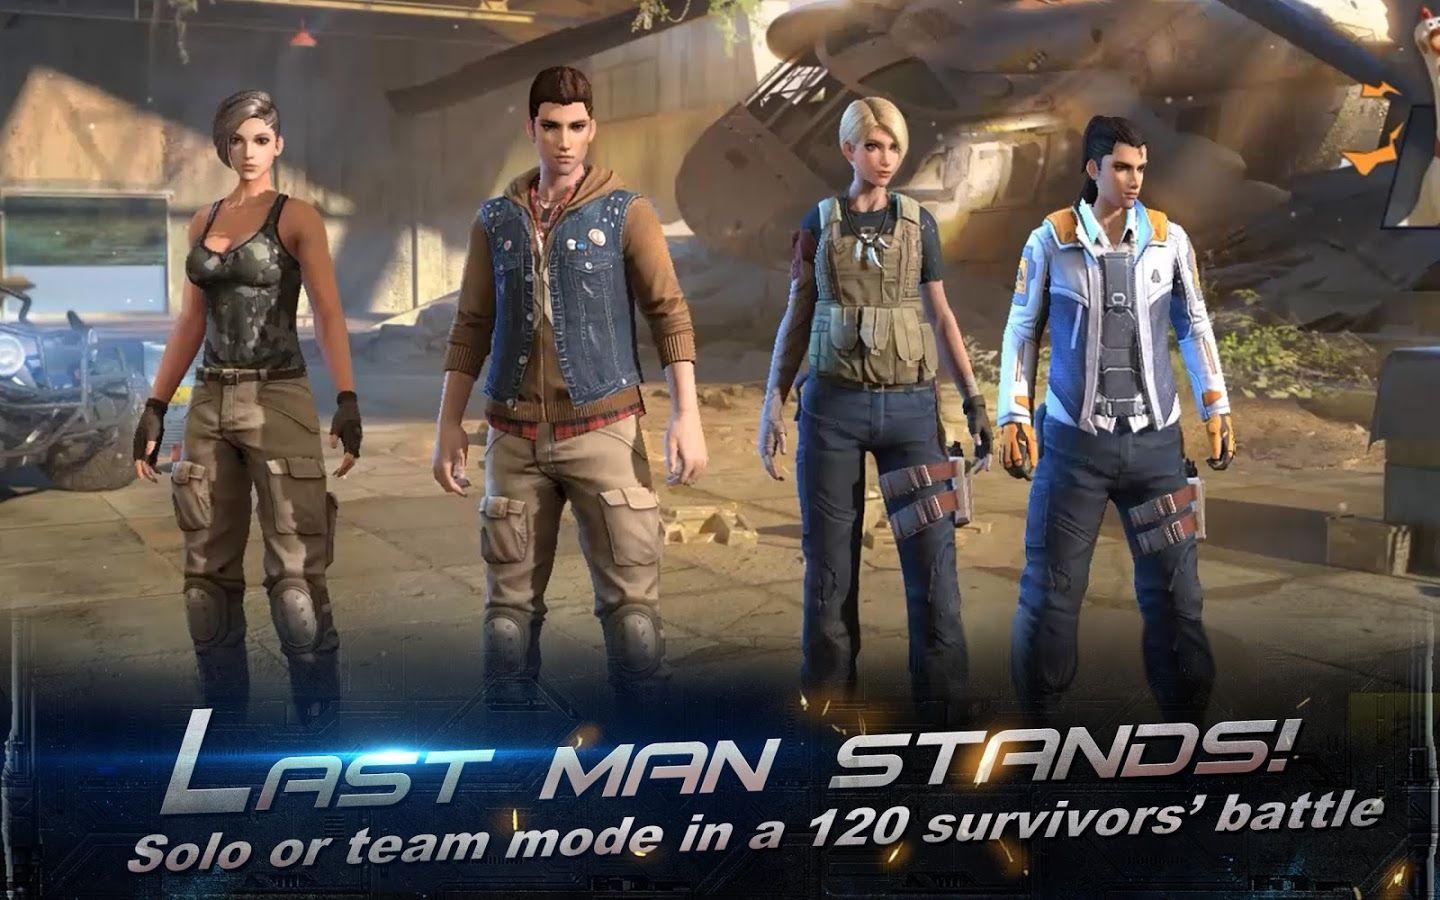 rules of survival facebook